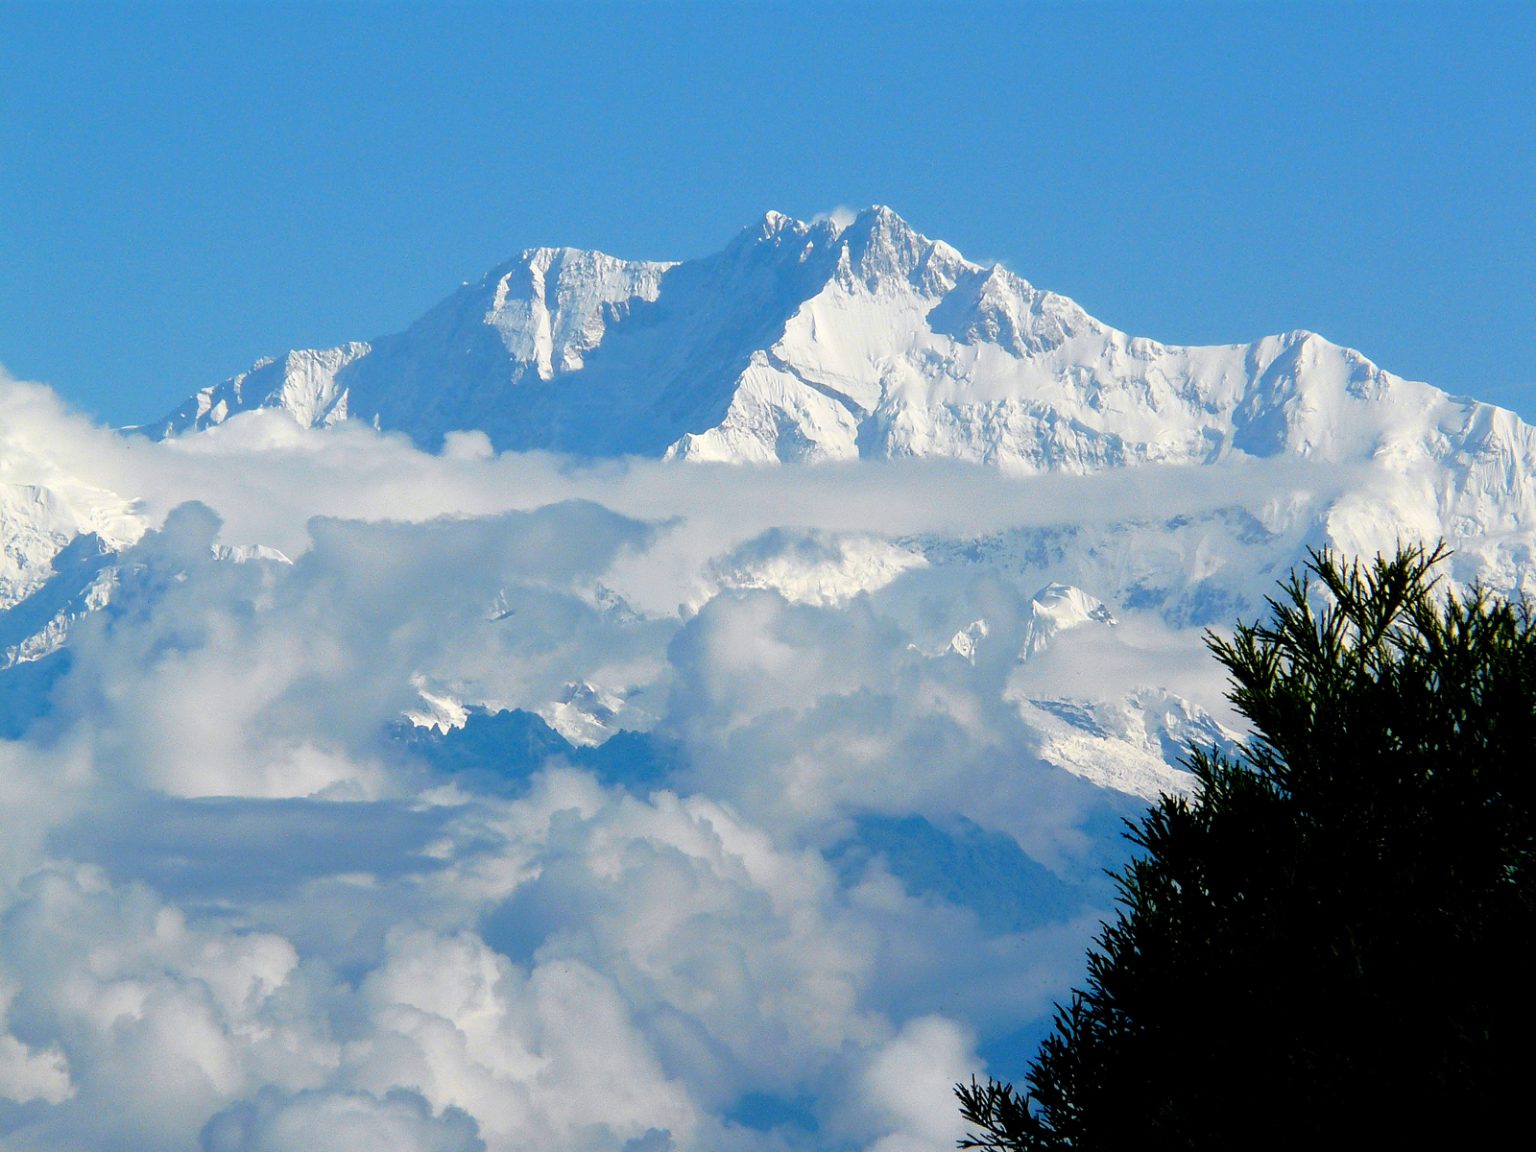 Indian climber dies on Mount Kanchenjunga in Nepal